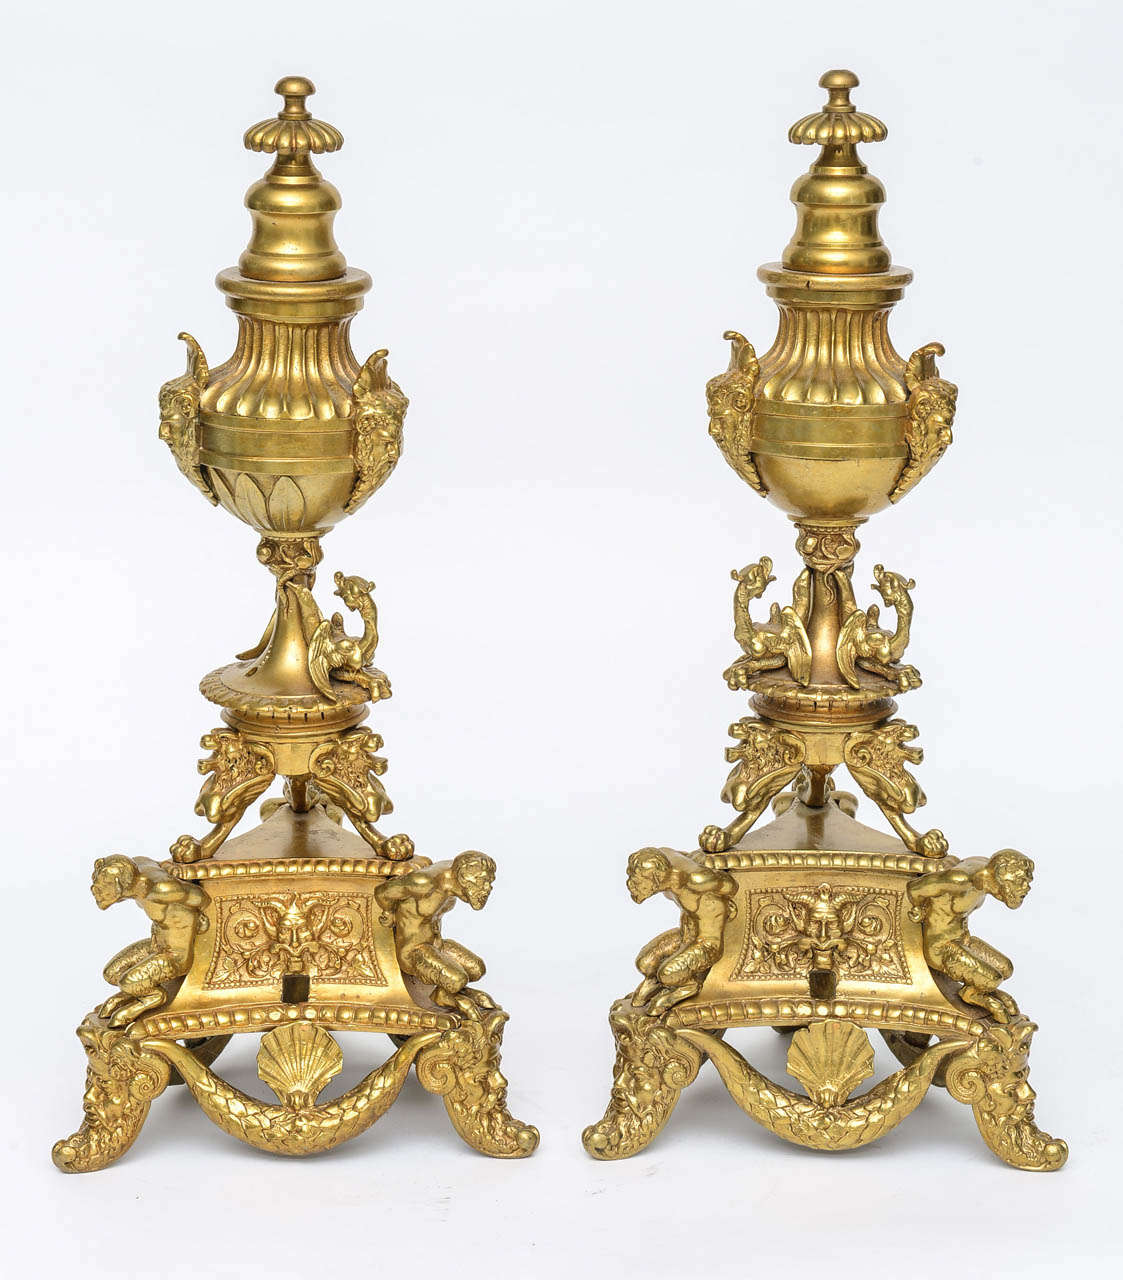 These highly articulated gilt bronze andirons are based on a 16th century design for candlesticks by the great Italian renaissance sculptor Andrea Briosco known as Riccio (1470-1532).  Riccio's great masterpiece is the Paschal candelabrum in the